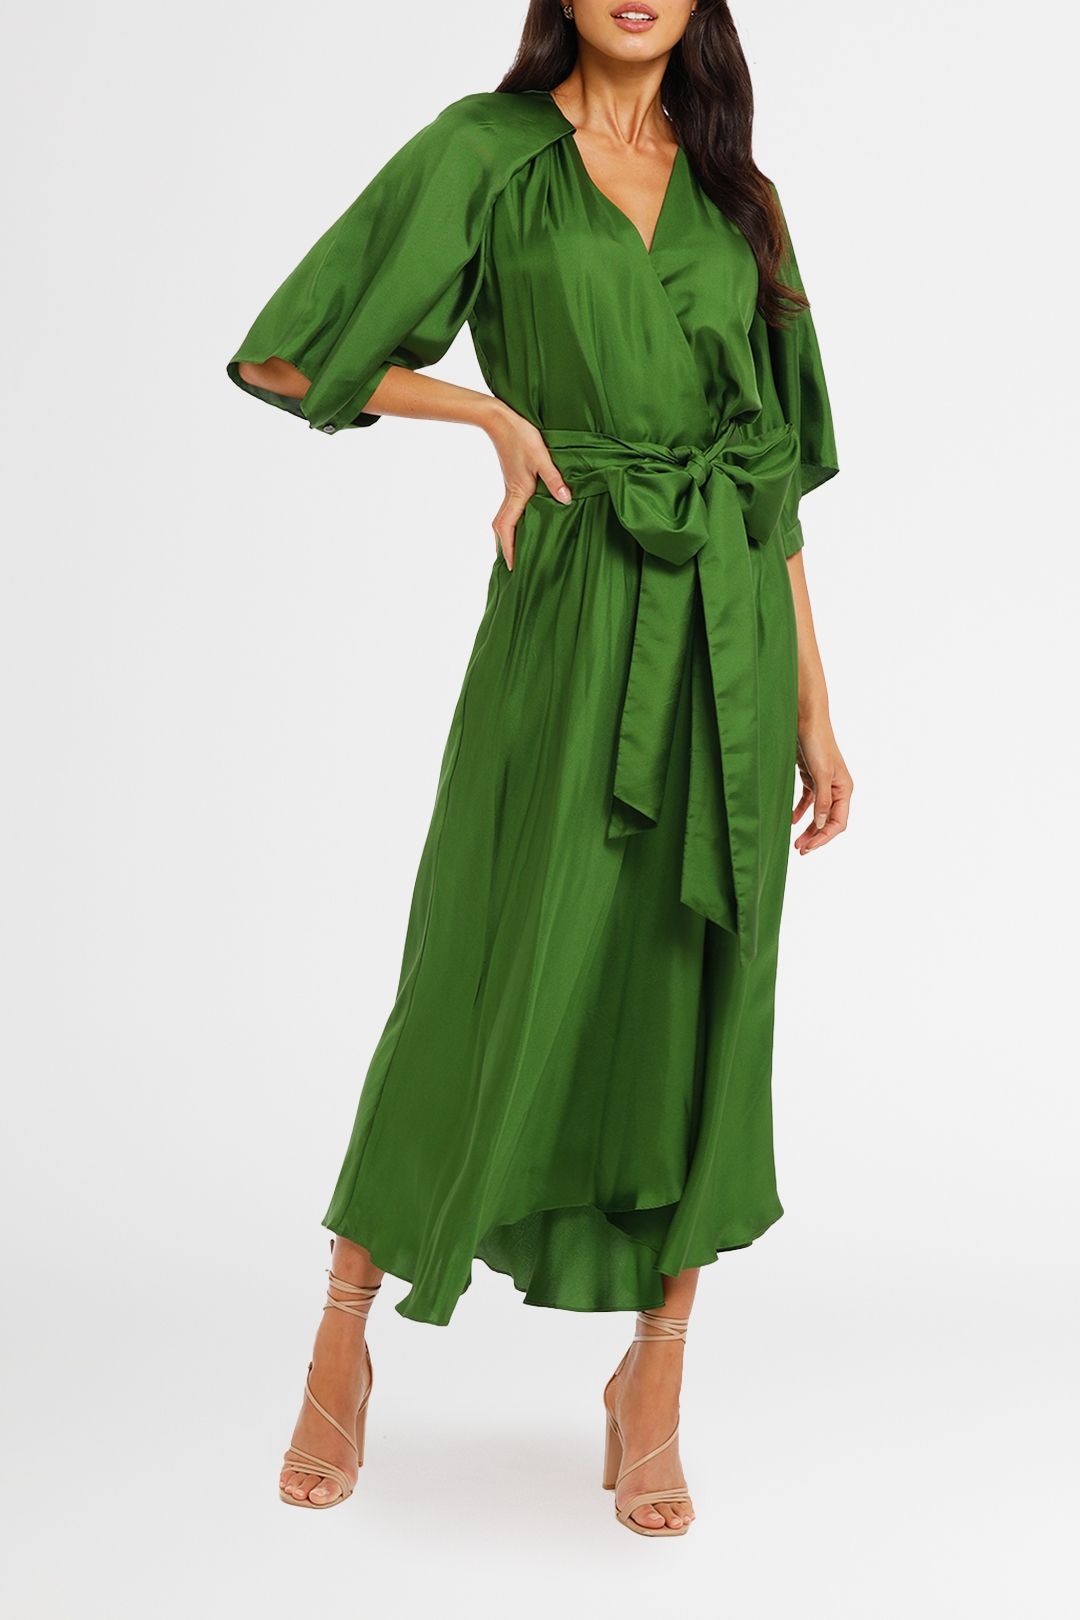 Ginger and Smart Easel Wrap Dress in Fern MIDI